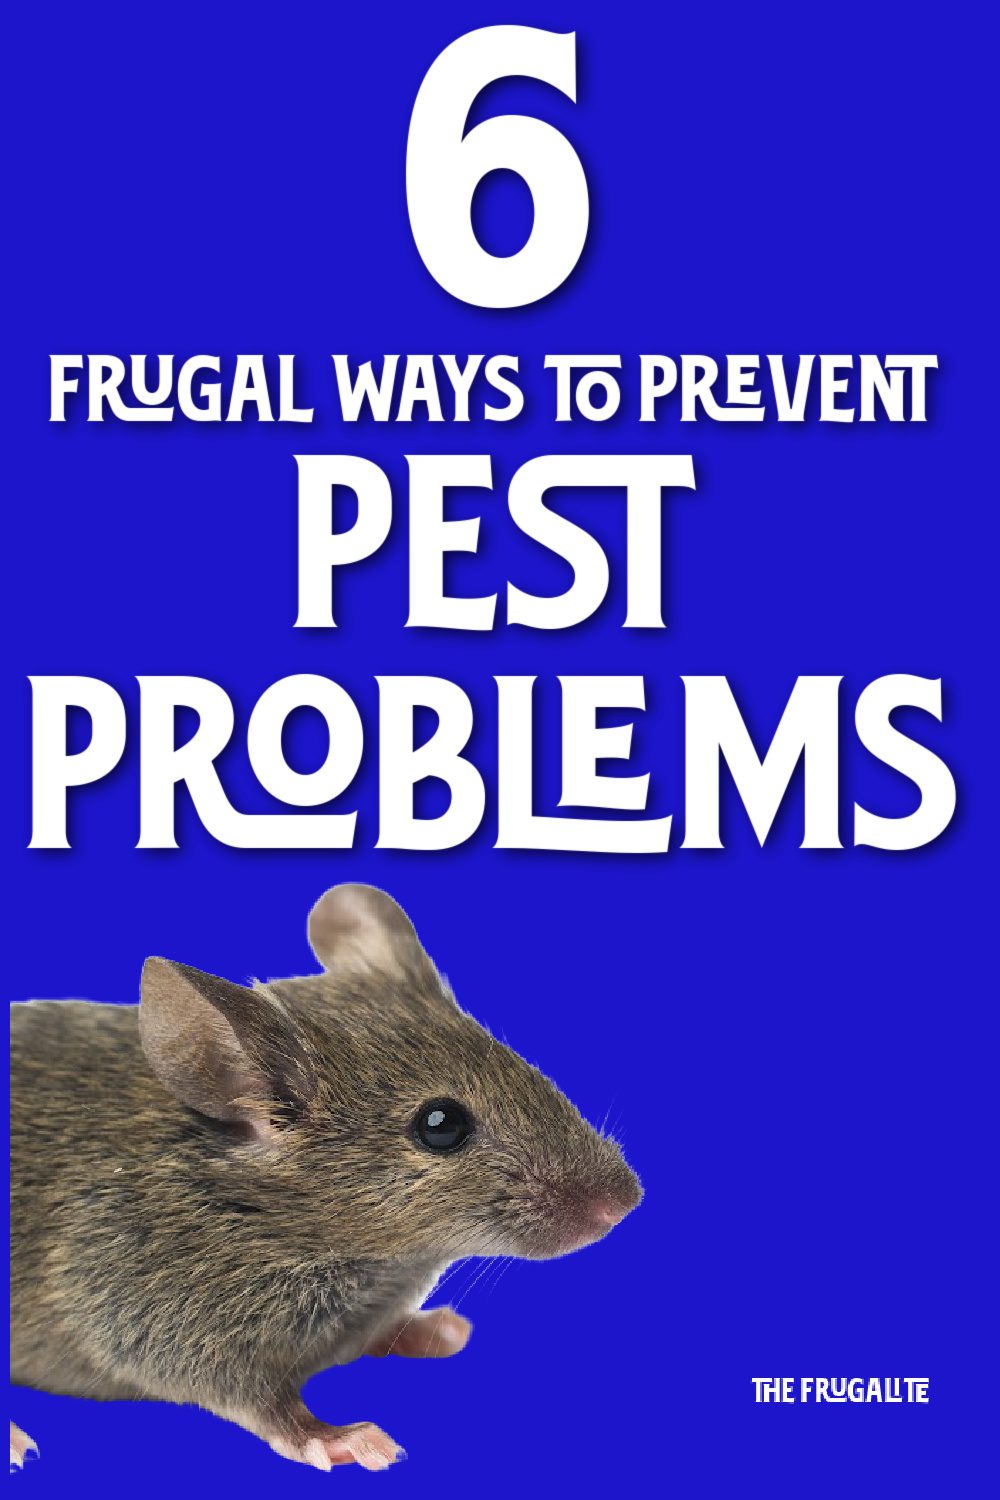 6 Frugal Ways to PREVENT Pest Problems